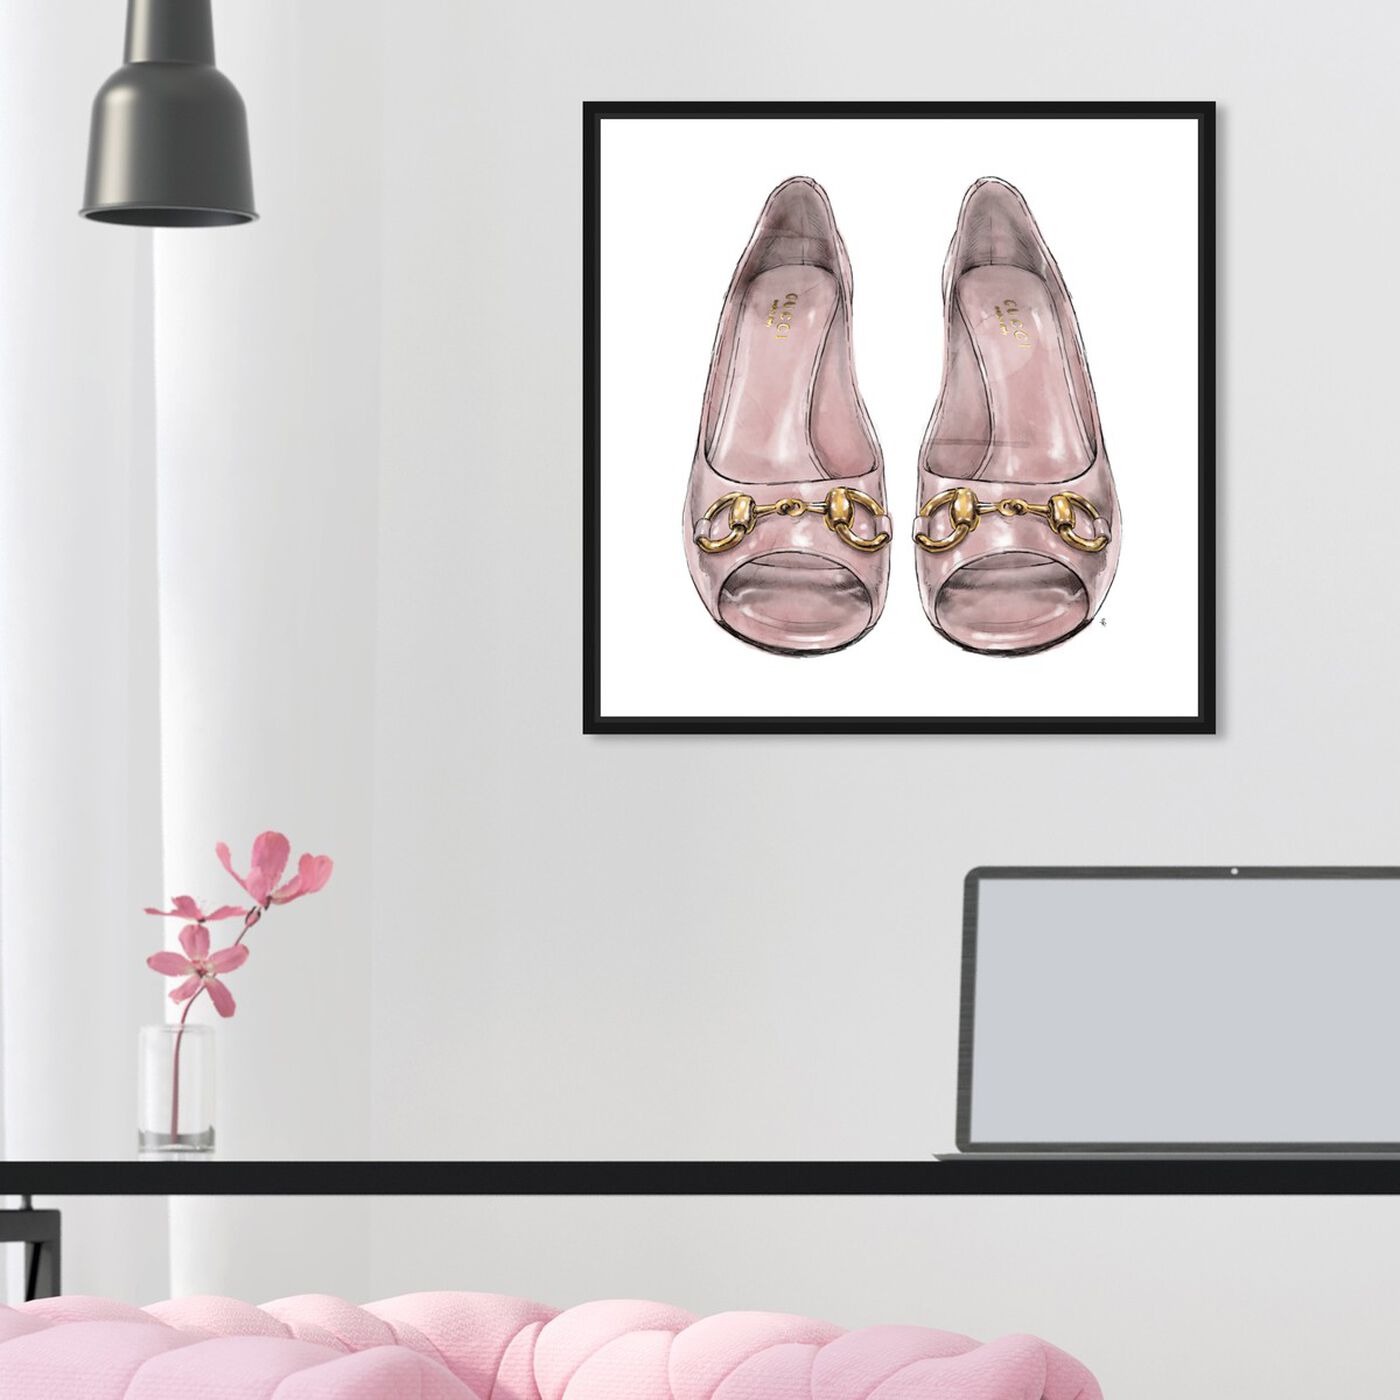 Hanging view of Ladylike Heels featuring fashion and glam and shoes art.